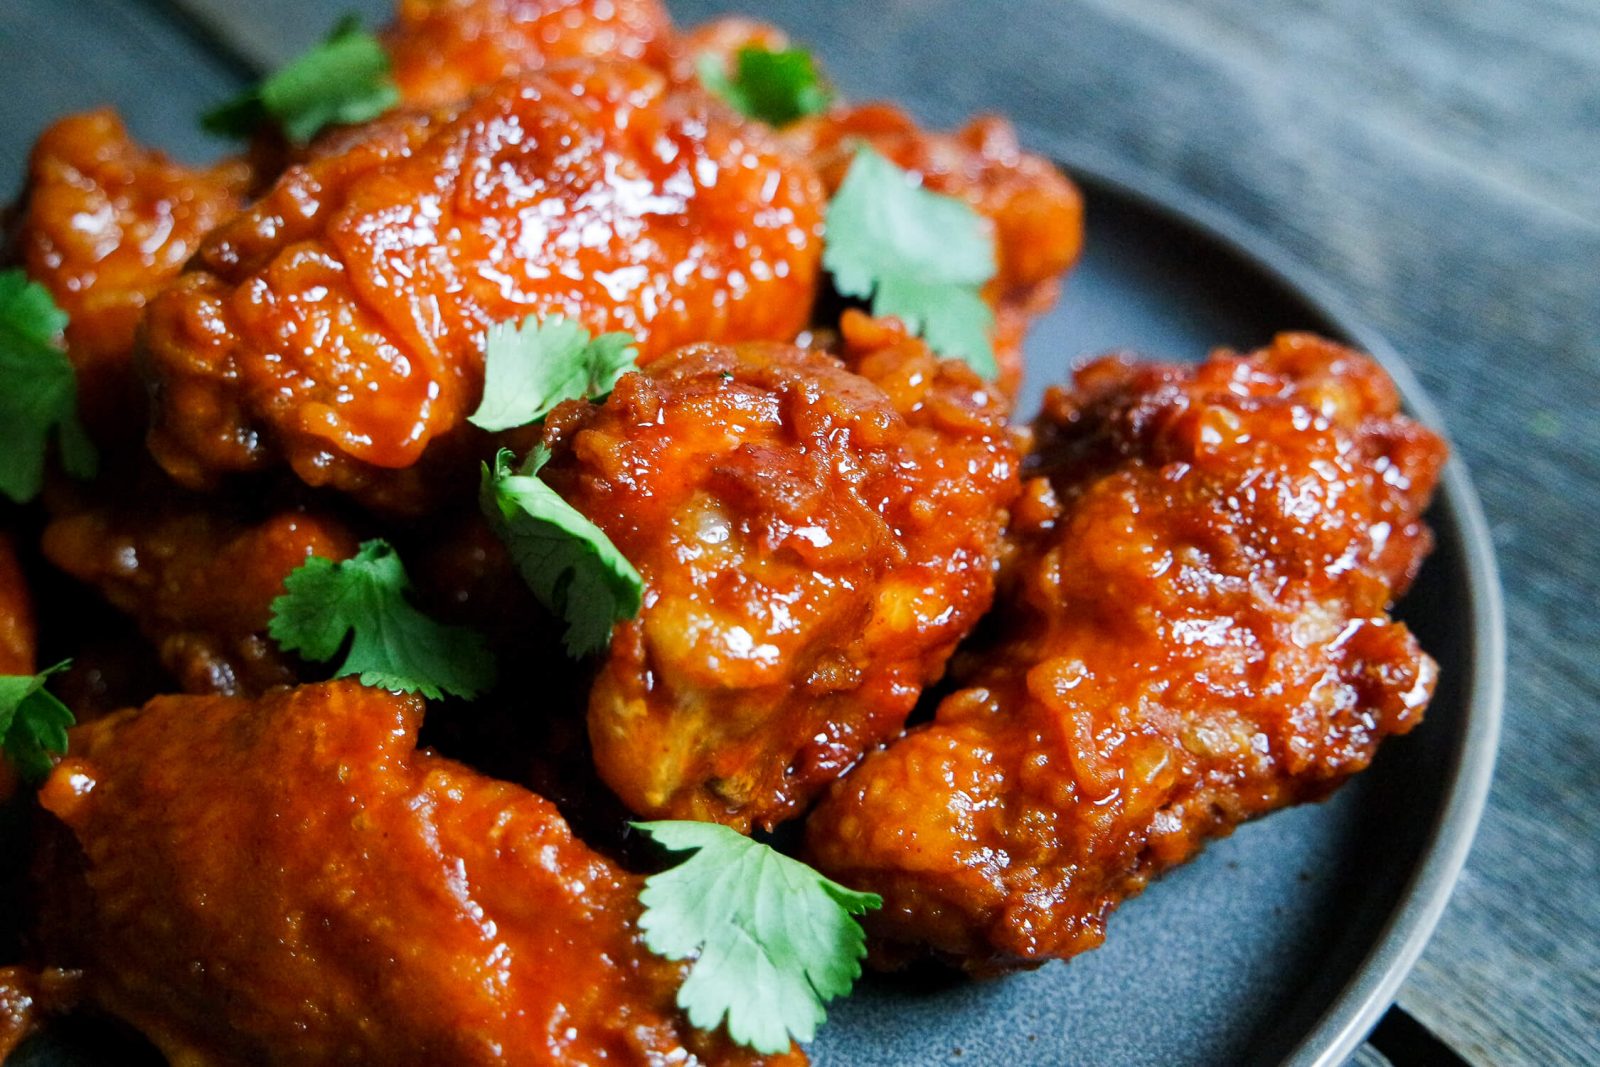 🌶 Only a Person Who Can Handle the Heat Will Have Eaten 13/25 of These Spicy Foods Spicy Korean Fried Chicken Wings